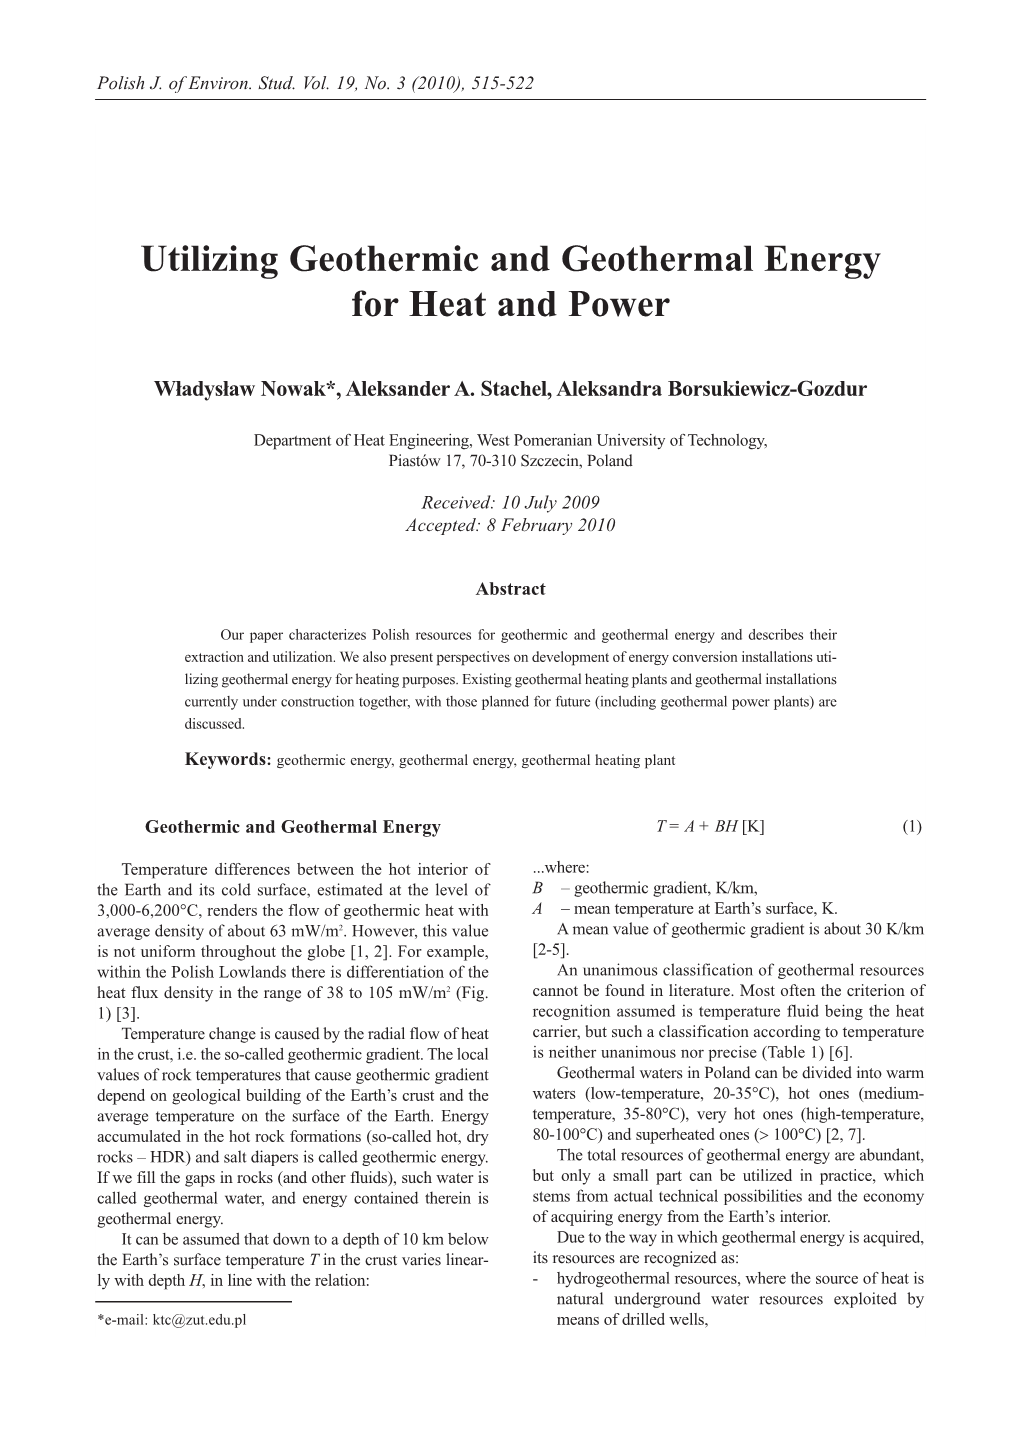 Utilizing Geothermic and Geothermal Energy for Heat and Power